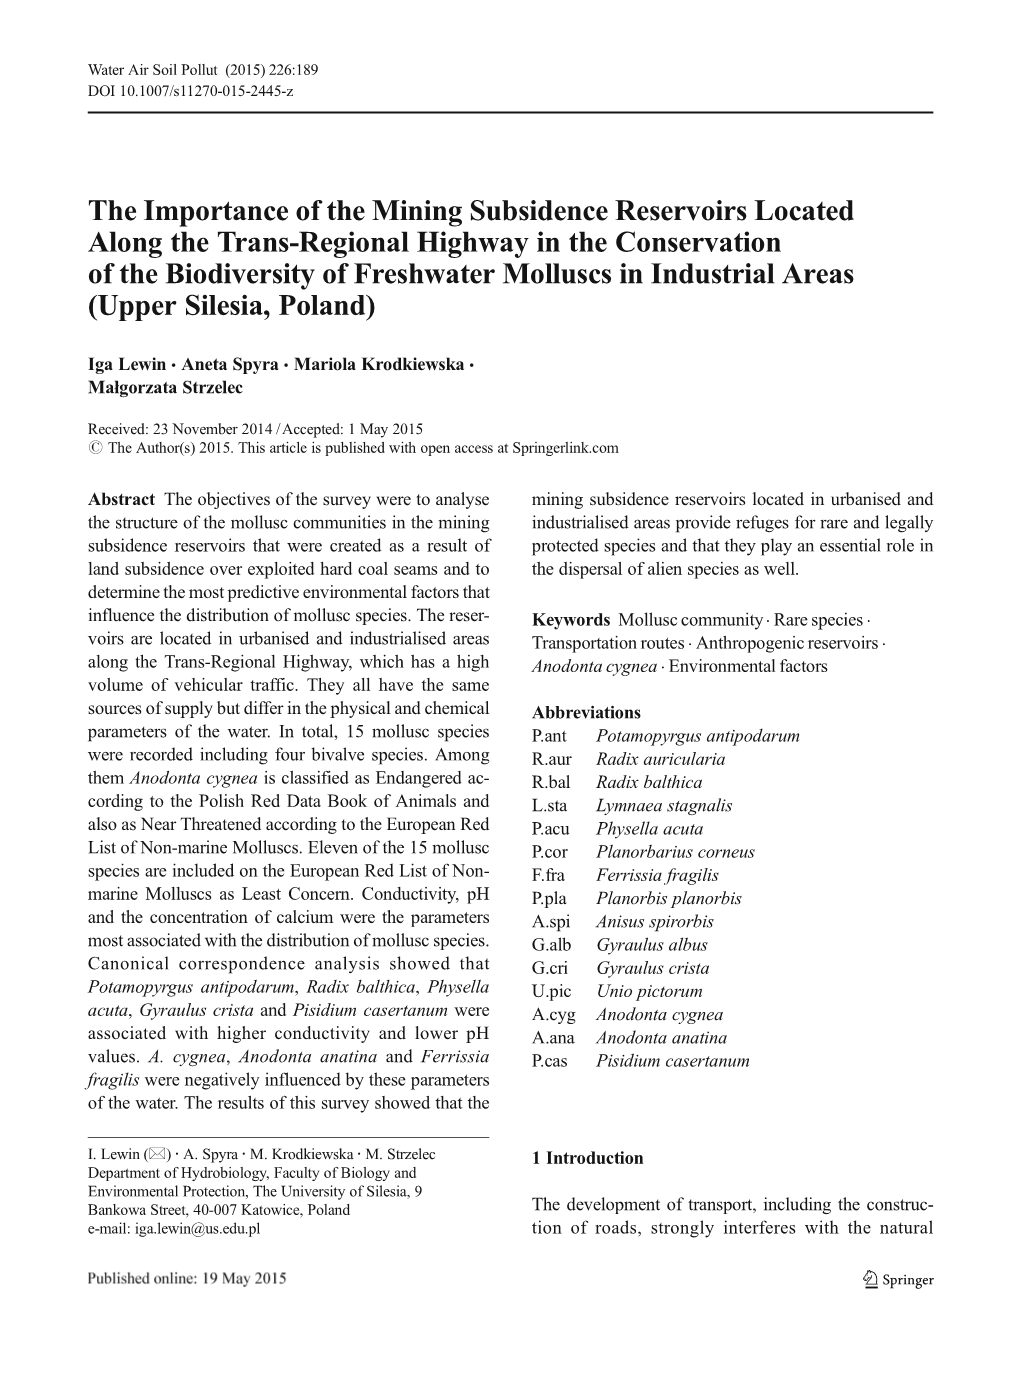 The Importance of the Mining Subsidence Reservoirs Located Along the Trans-Regional Highway in the Conservation of the Biodivers